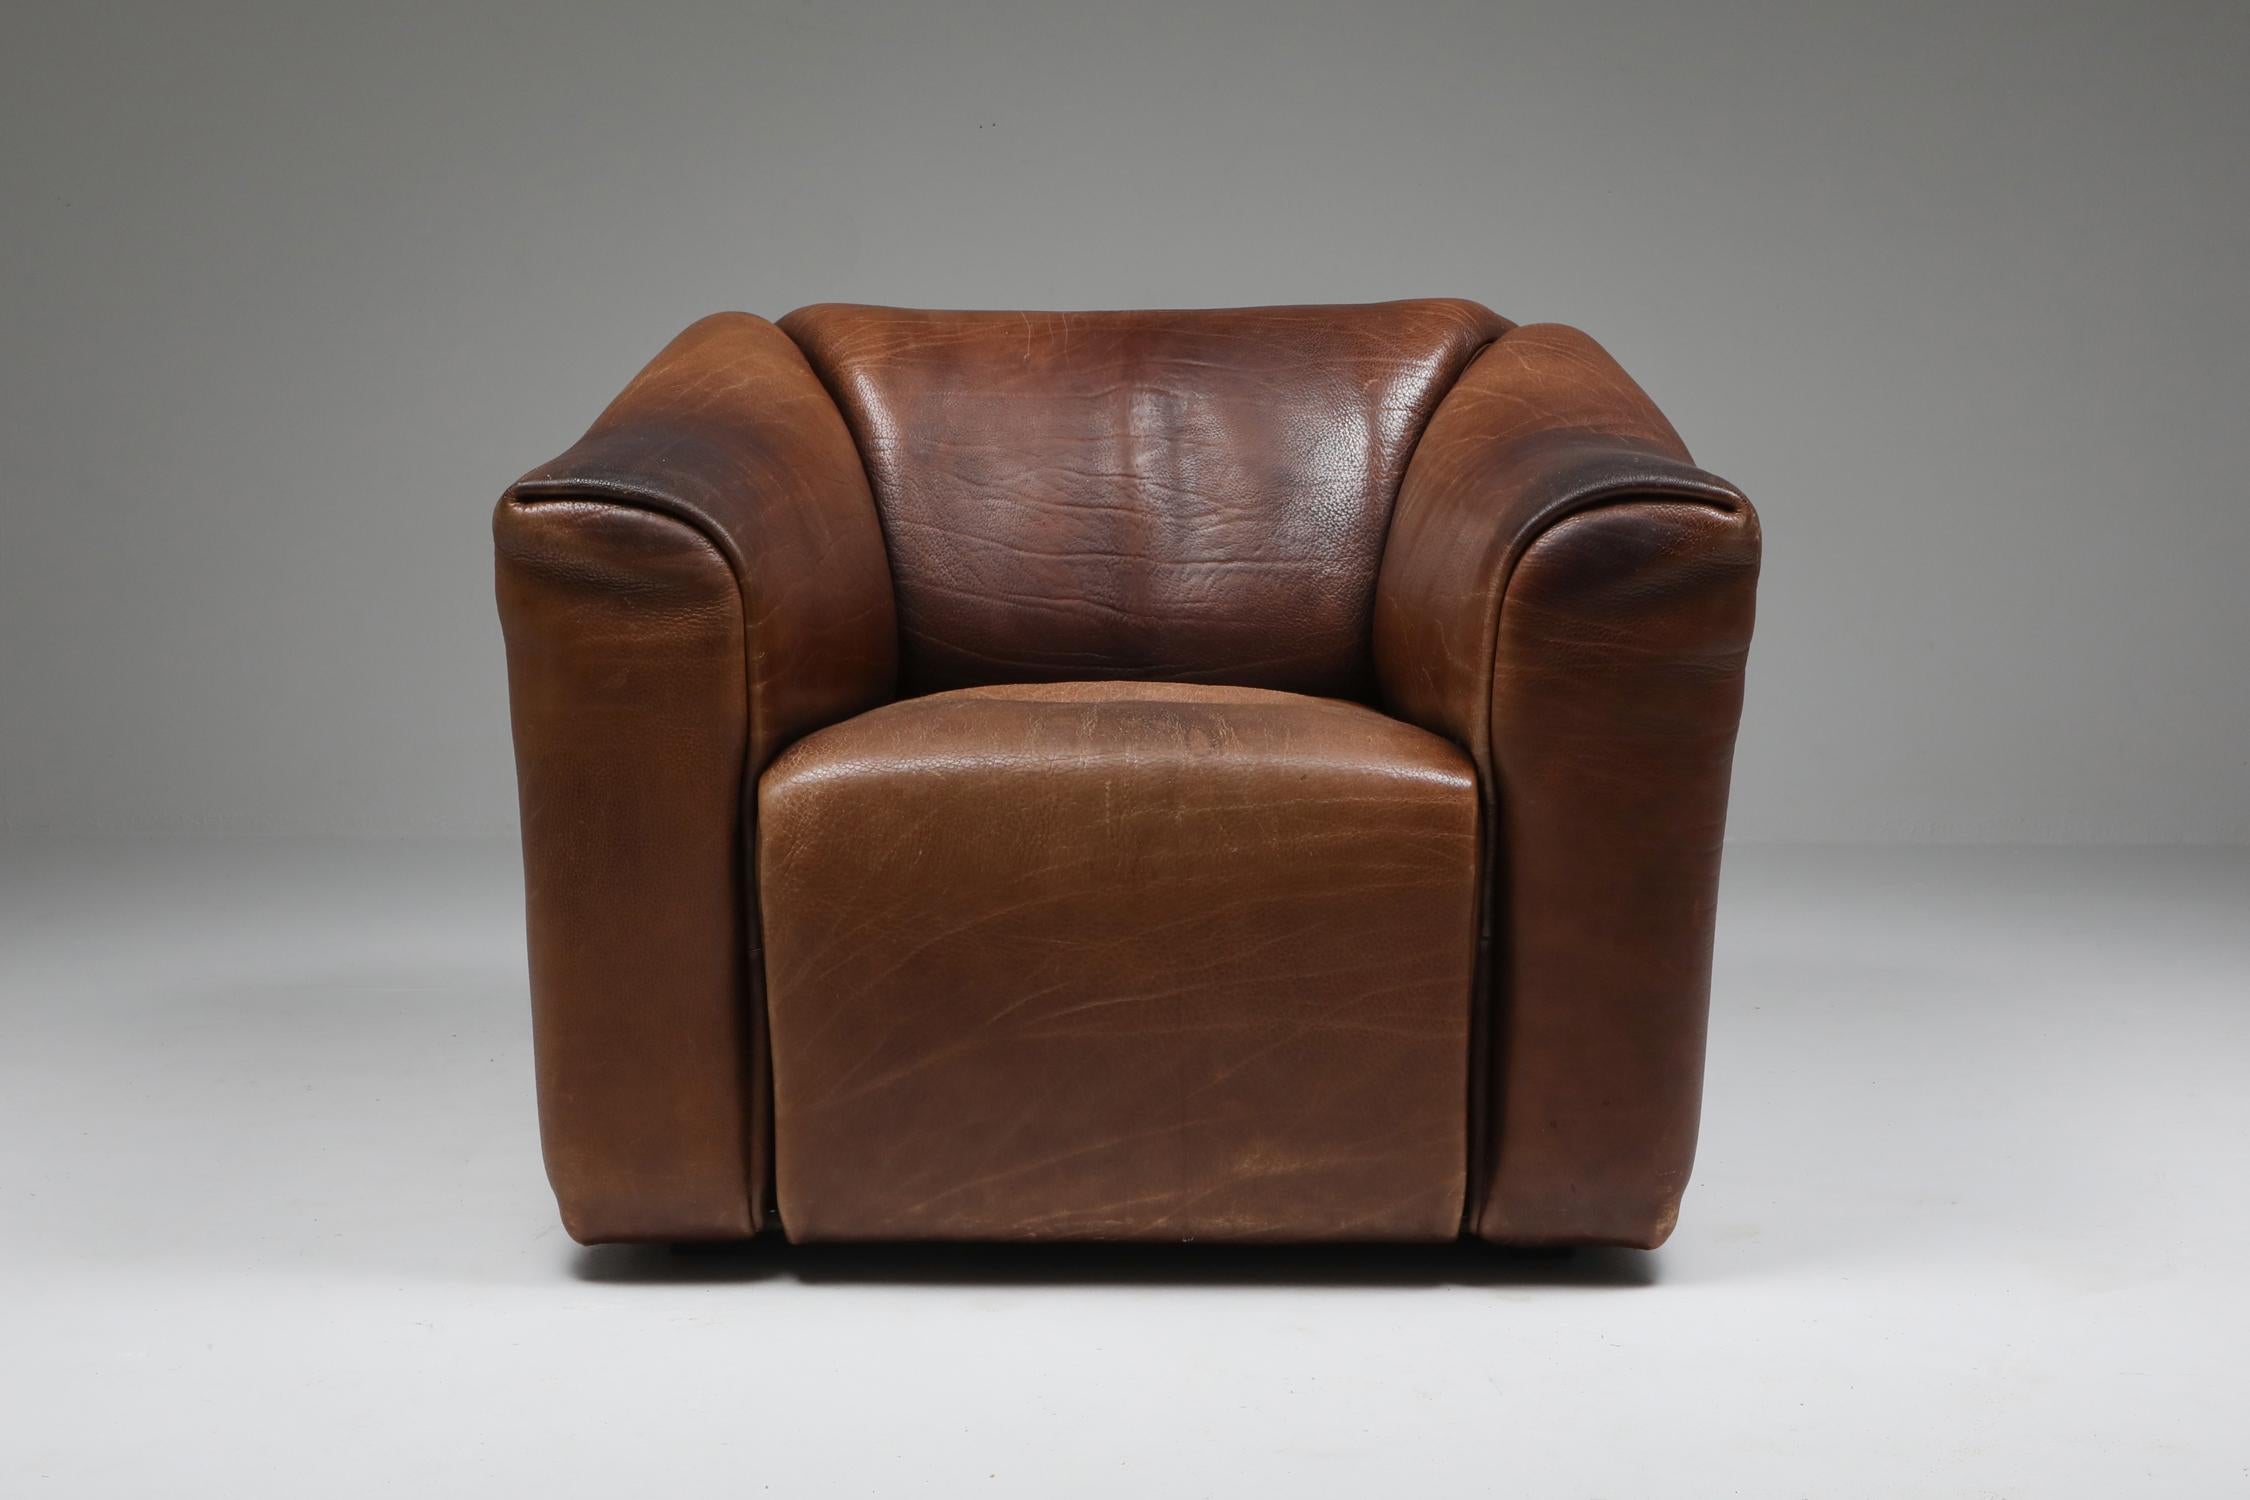 Brown leather armchair by Swiss manufacturer De Sede. Bullhide leather with retractable seating for an even more comfortable seat. The DS 47 model is a true design Classic and is still in production. This is an original model with tons of character